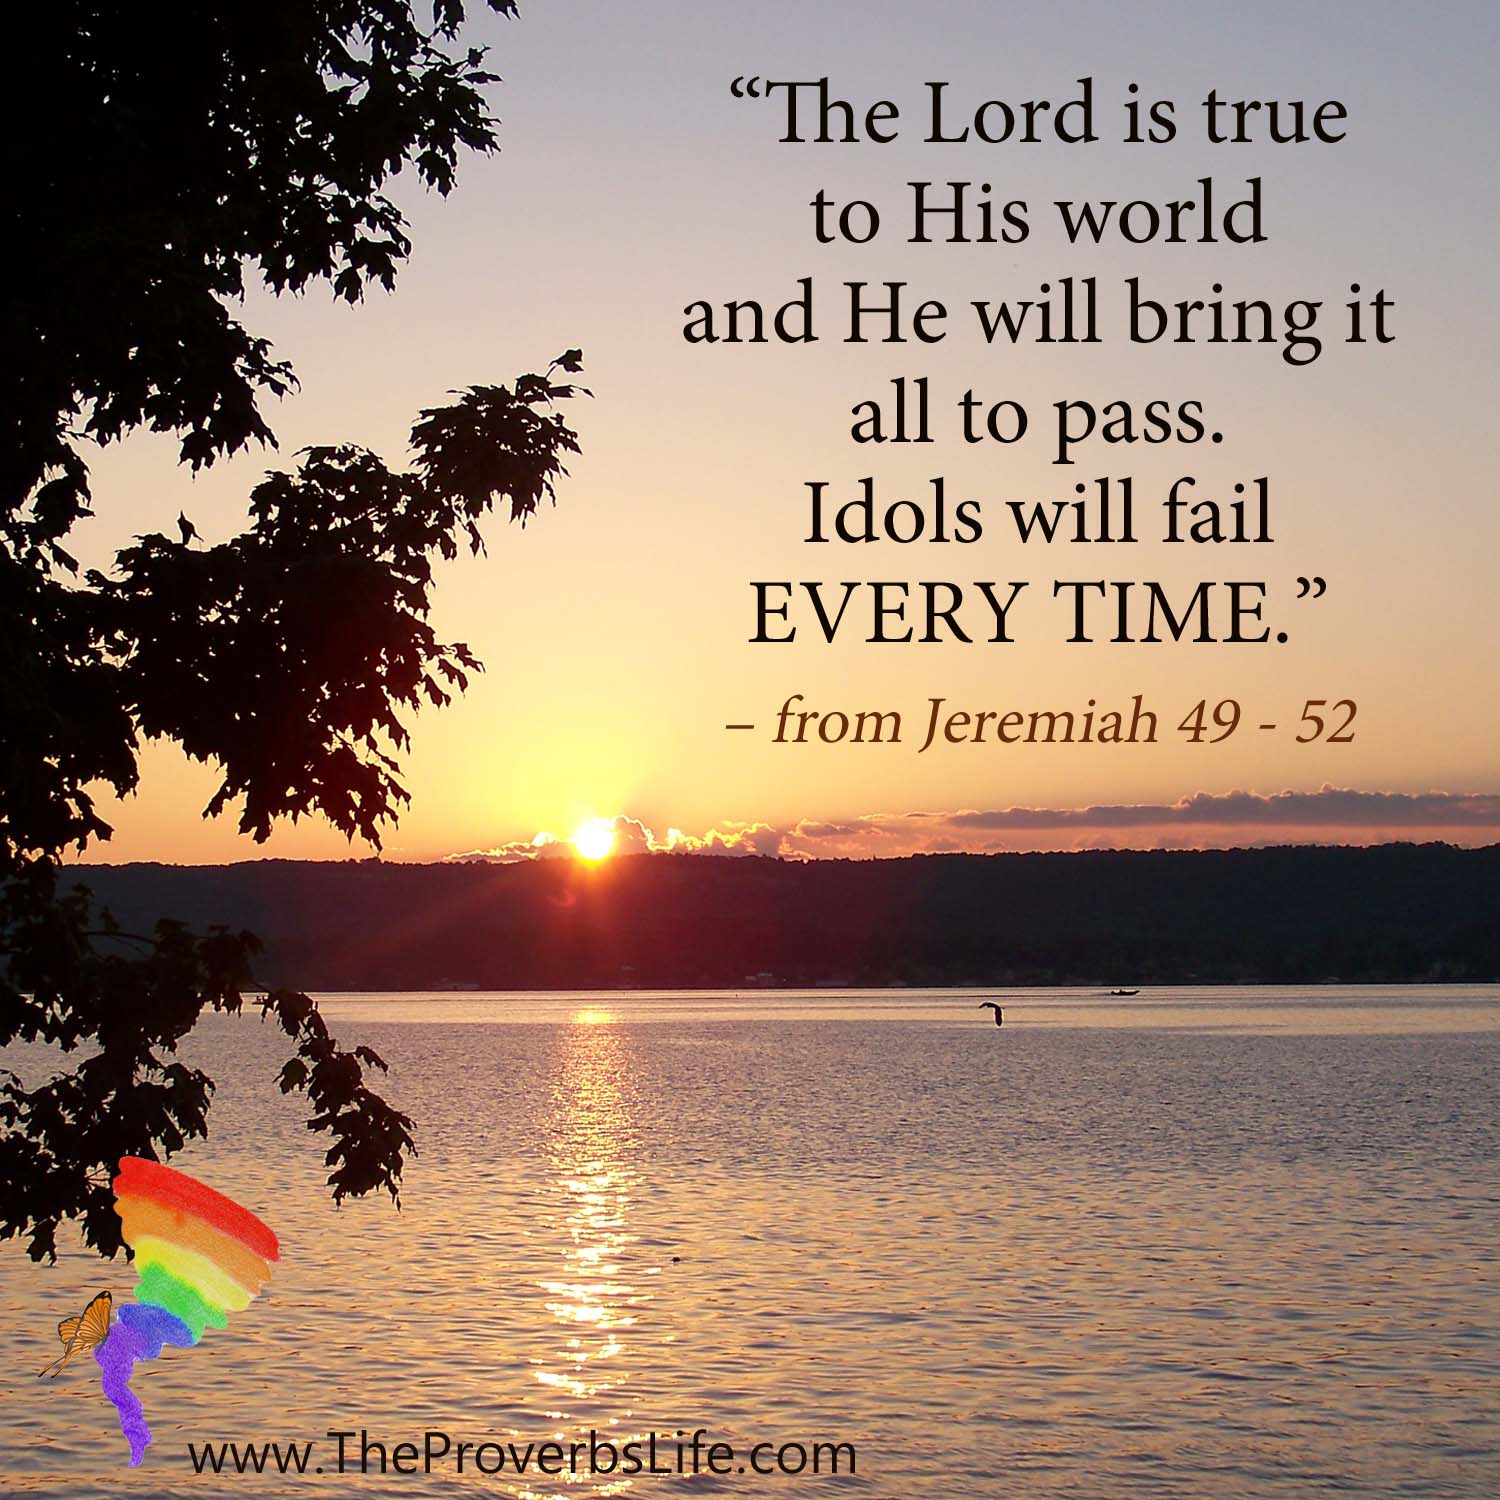 Scripture Focus - from Jeremiah 49 - 52